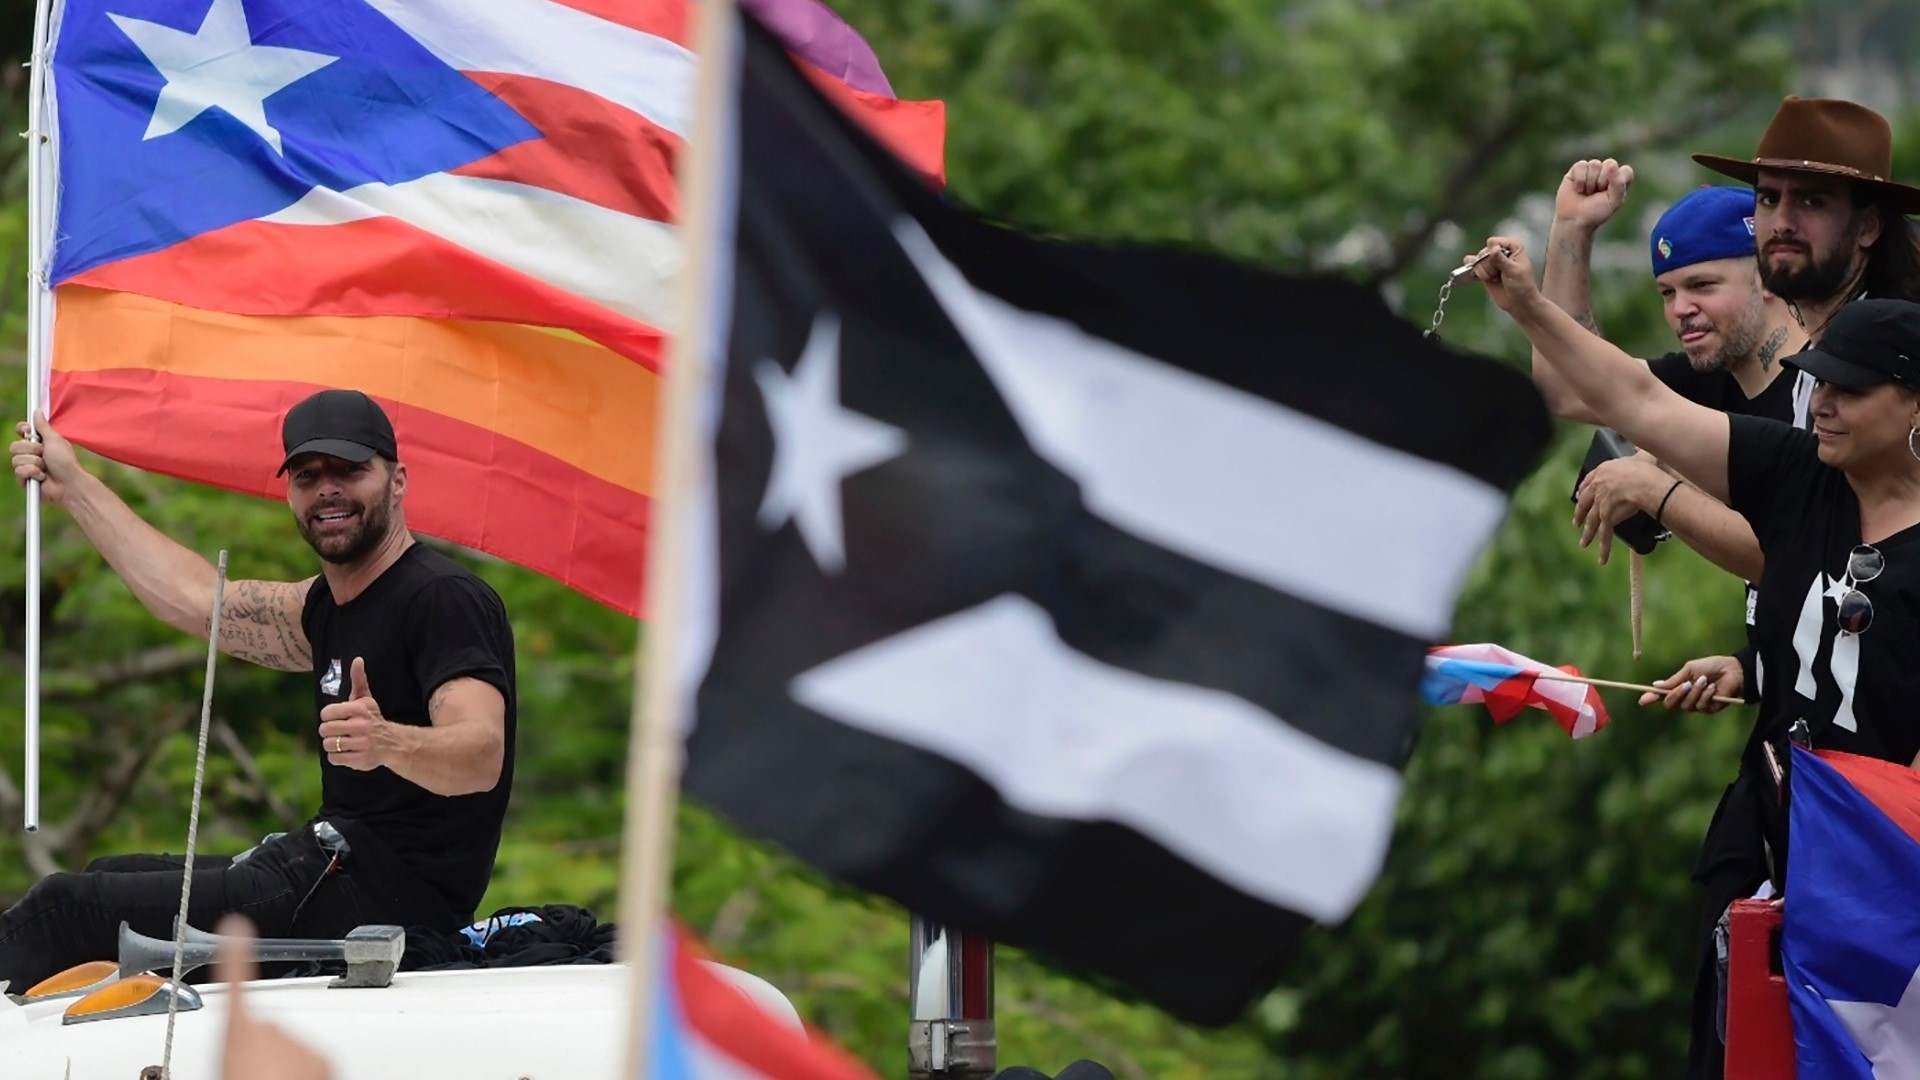 Puerto Ricans took to the streets by the hundreds of thousands for the second time in less than a week, Monday, to demand the resignation of the island’s governor, Ricardo Rosselló.